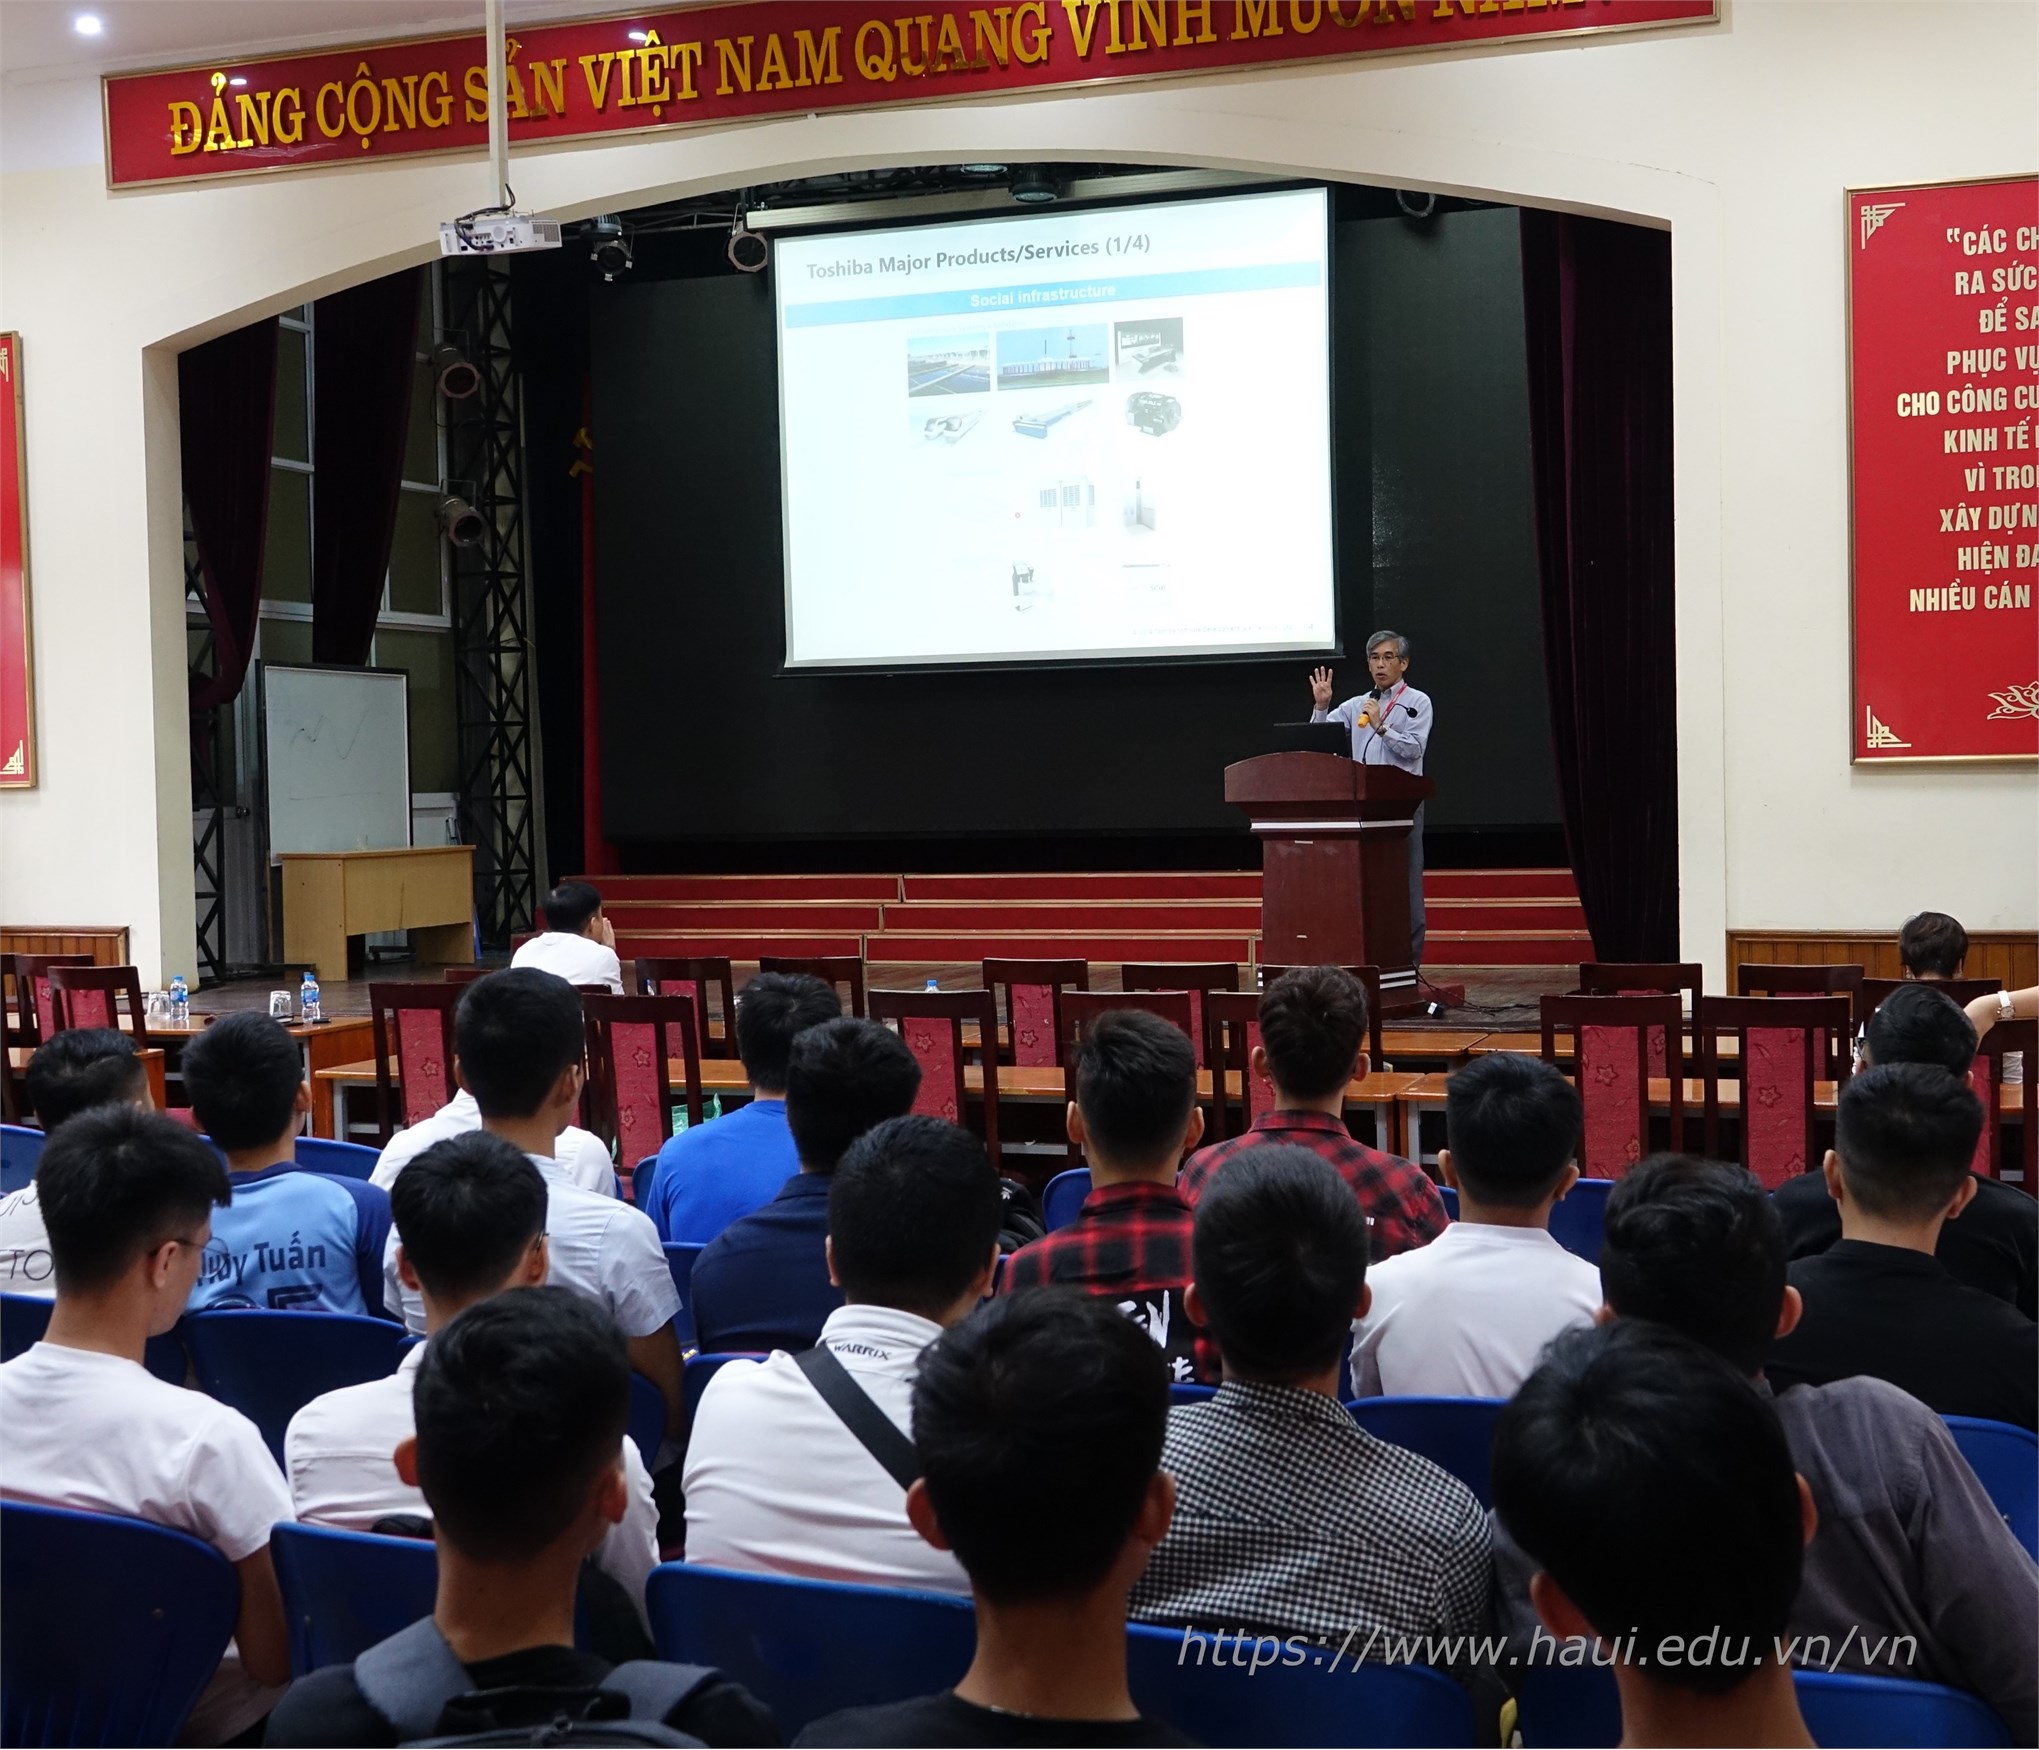 Many internship opportunities for IT and Electronics students at Toshiba Vietnam